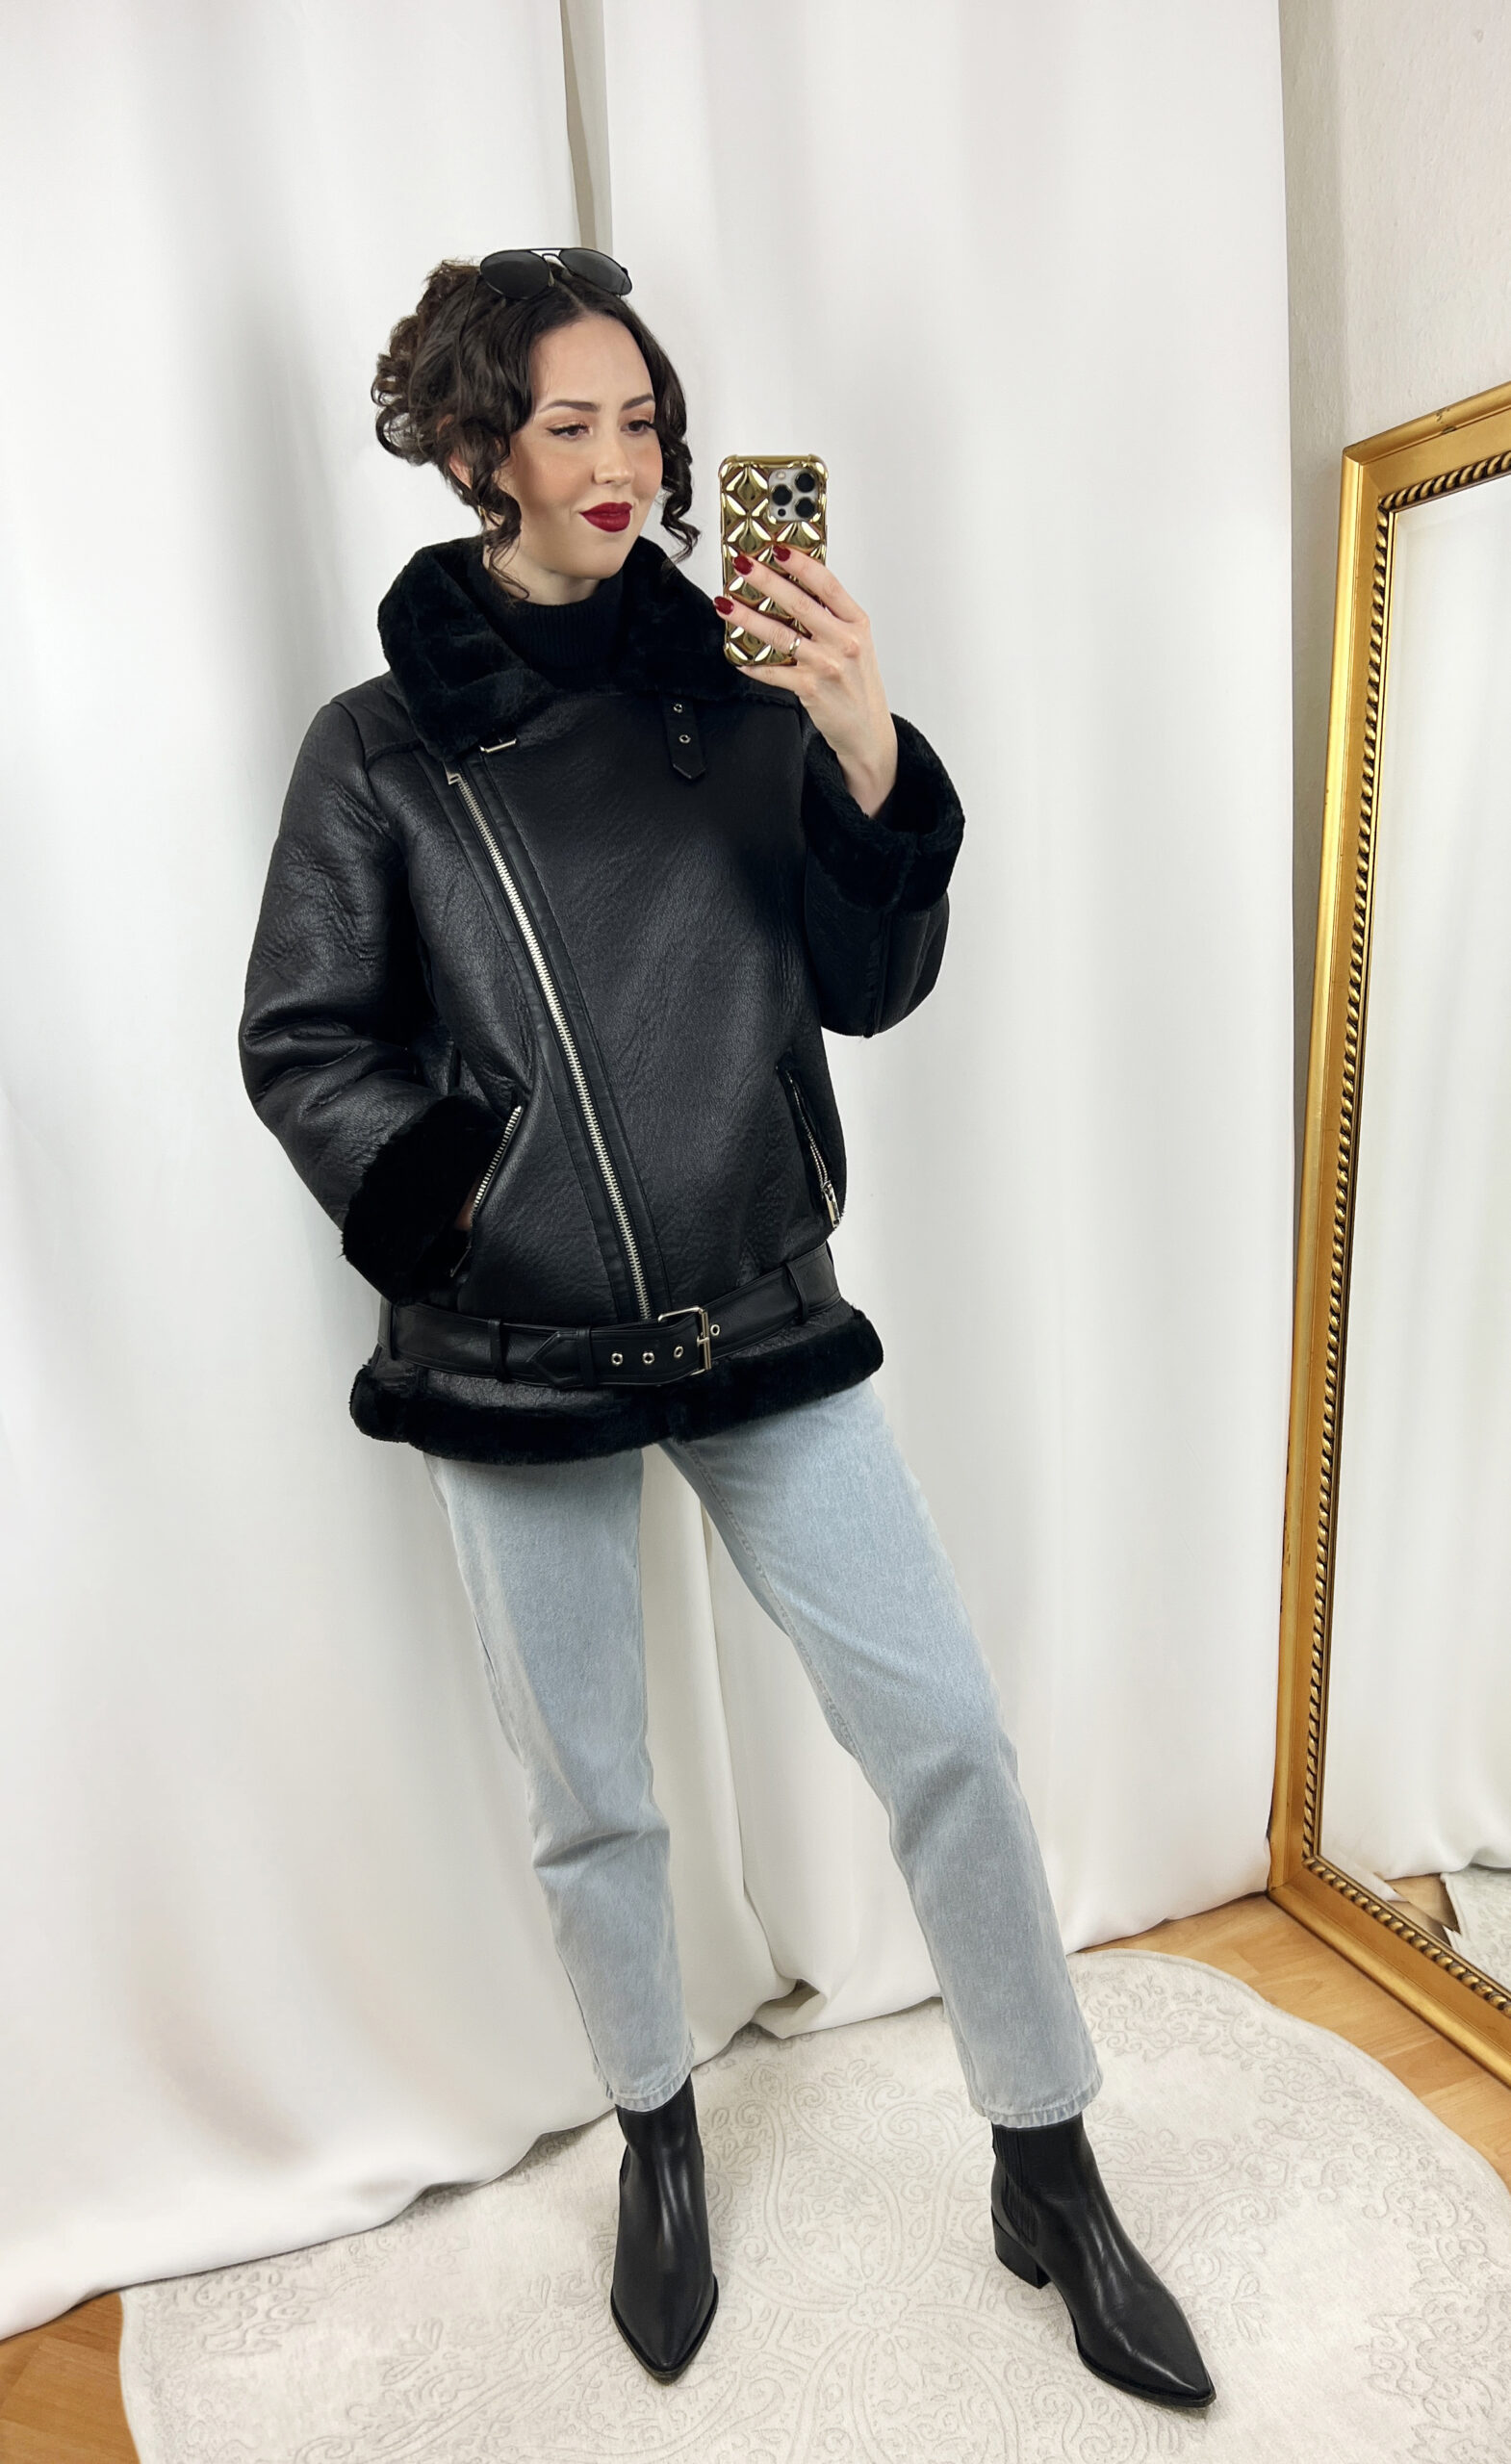 Aviator Jacket Outfit (with Jeans)